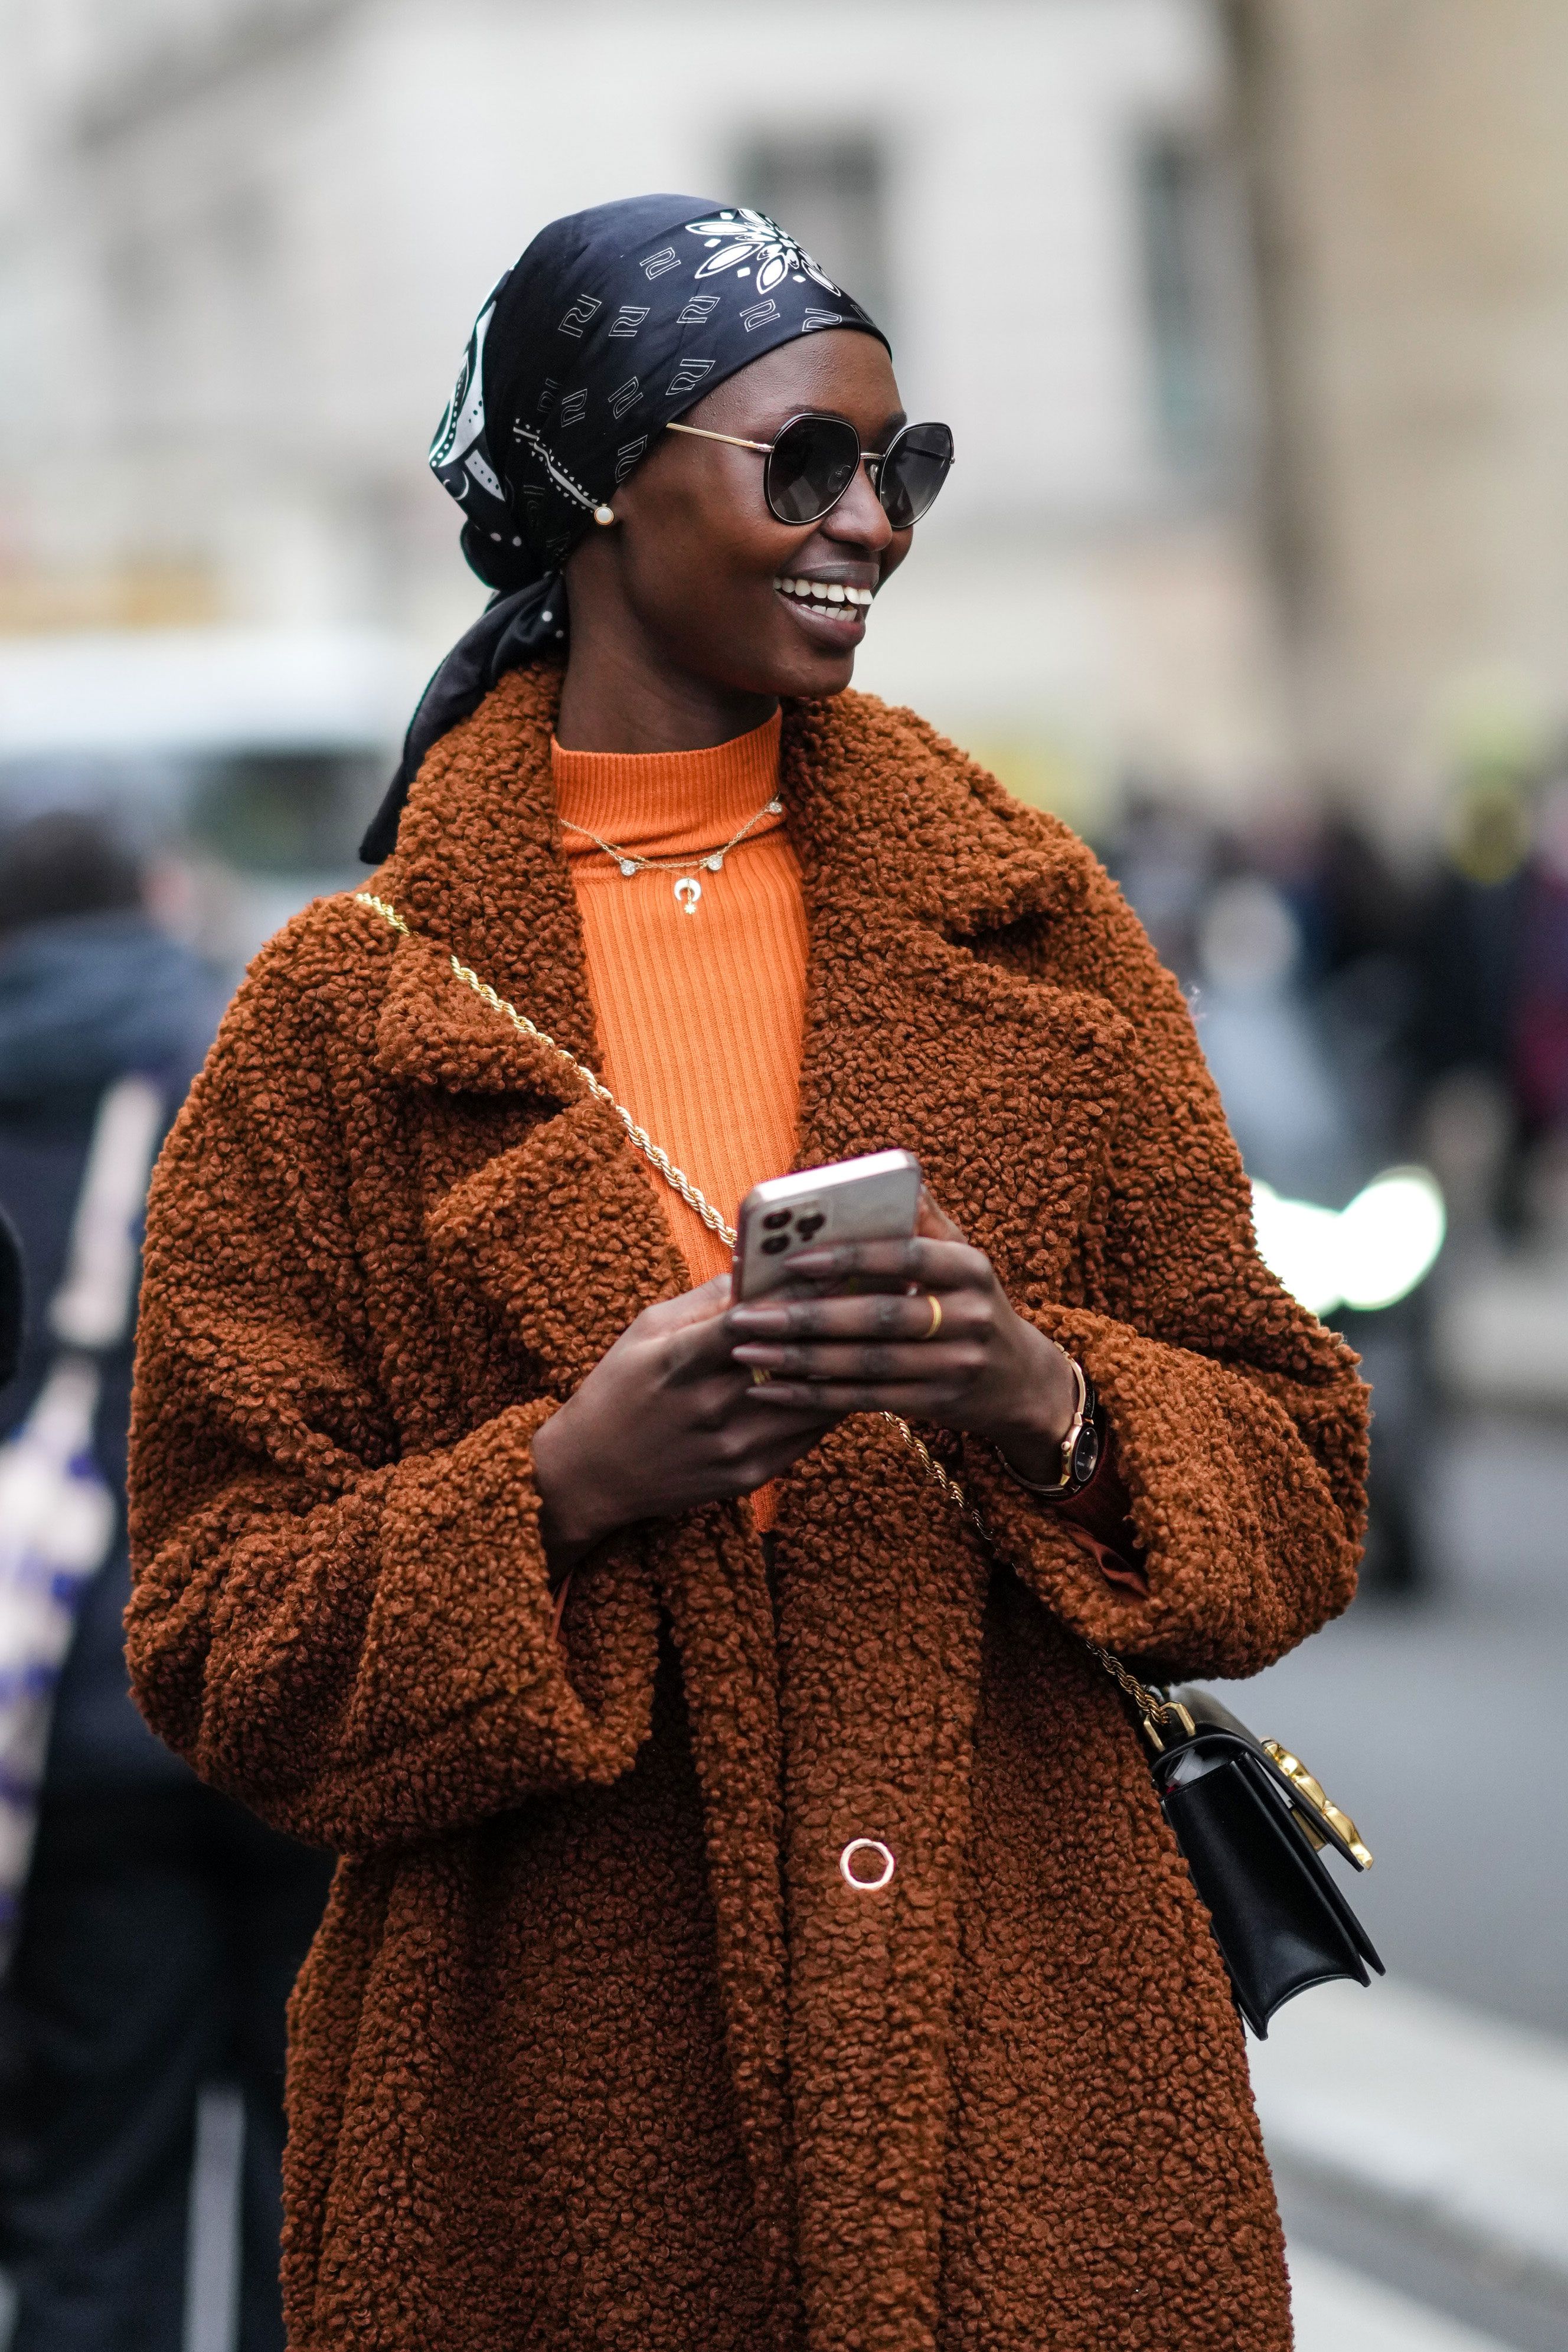 The Best Deals on Winter Clothes Under $50 Trending at